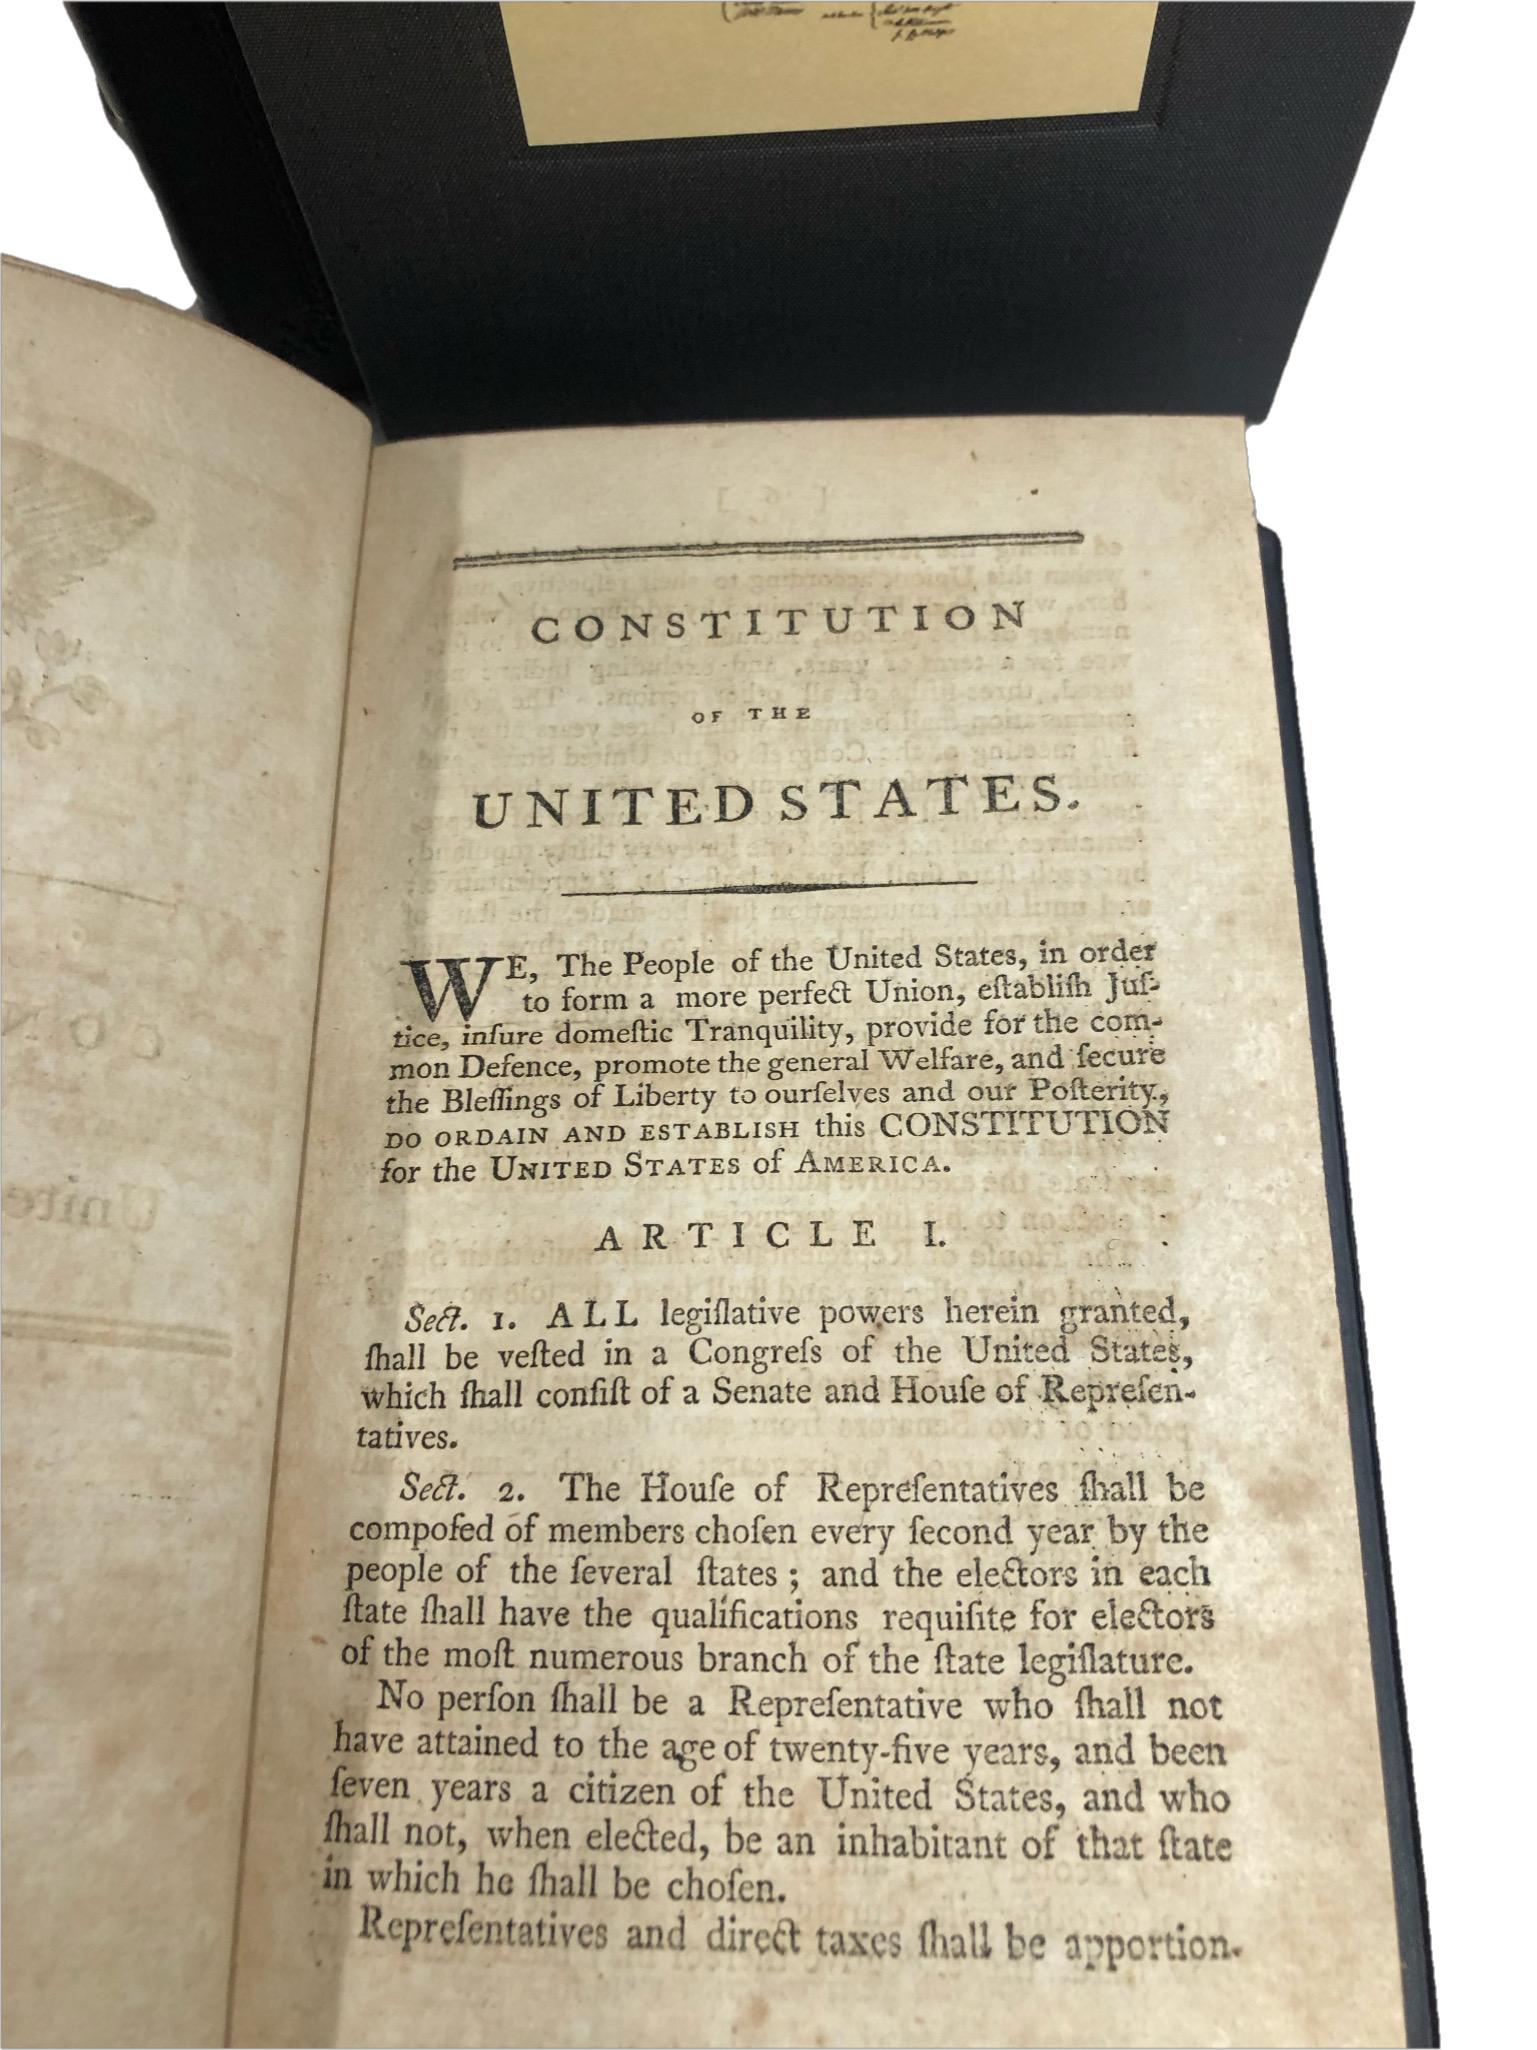 The Laws of the United States of America, First Edition, 3 Vol. Set, 1796-7 1